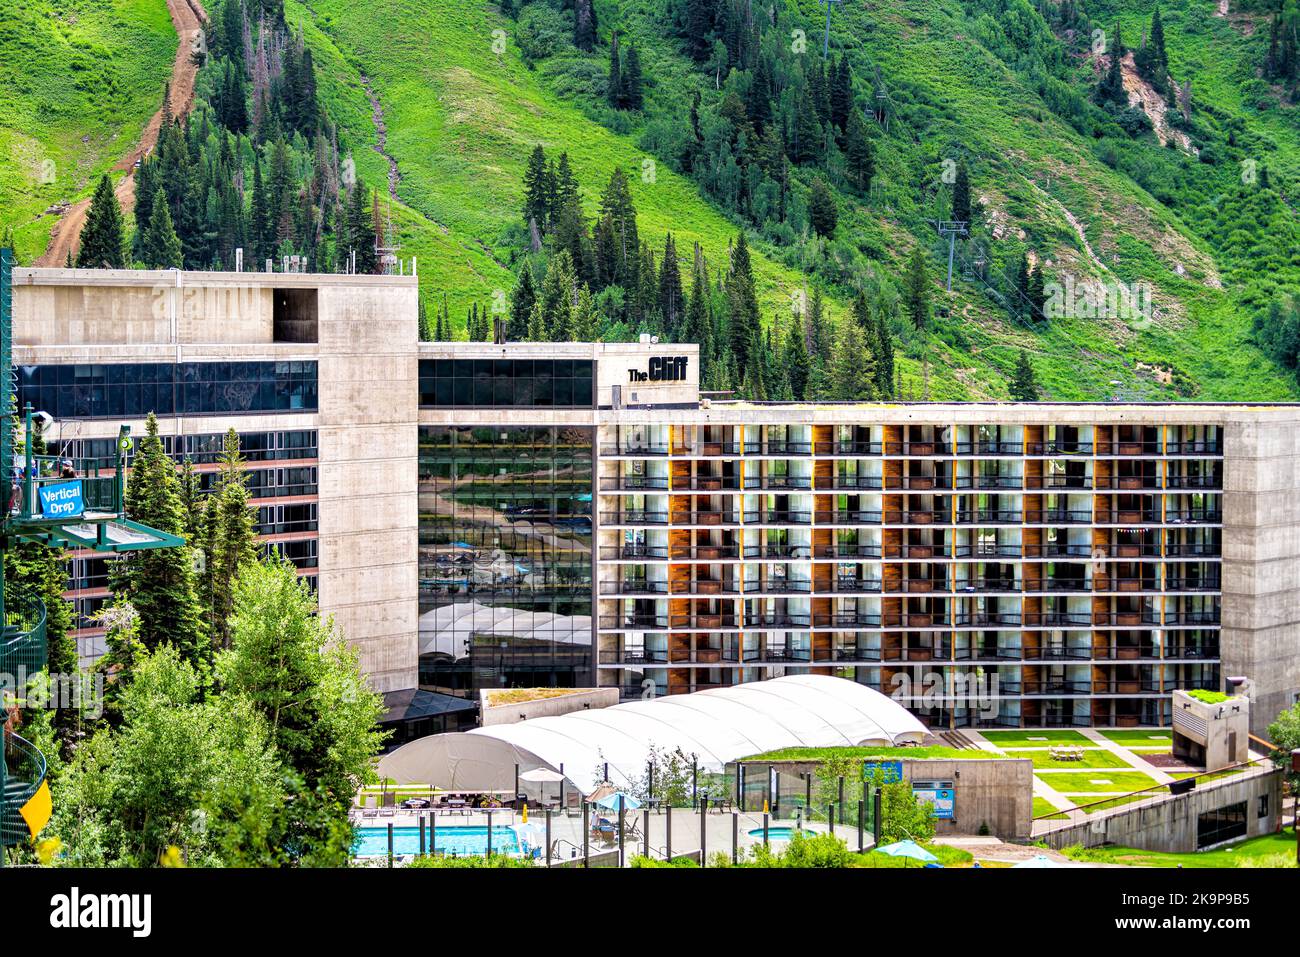 Alta, USA - July 25, 2019: Albion Basin, Utah cityscape small ski resort town village in summer and Little Cottonwood Canyon by hotel lodge the Cliff Stock Photo